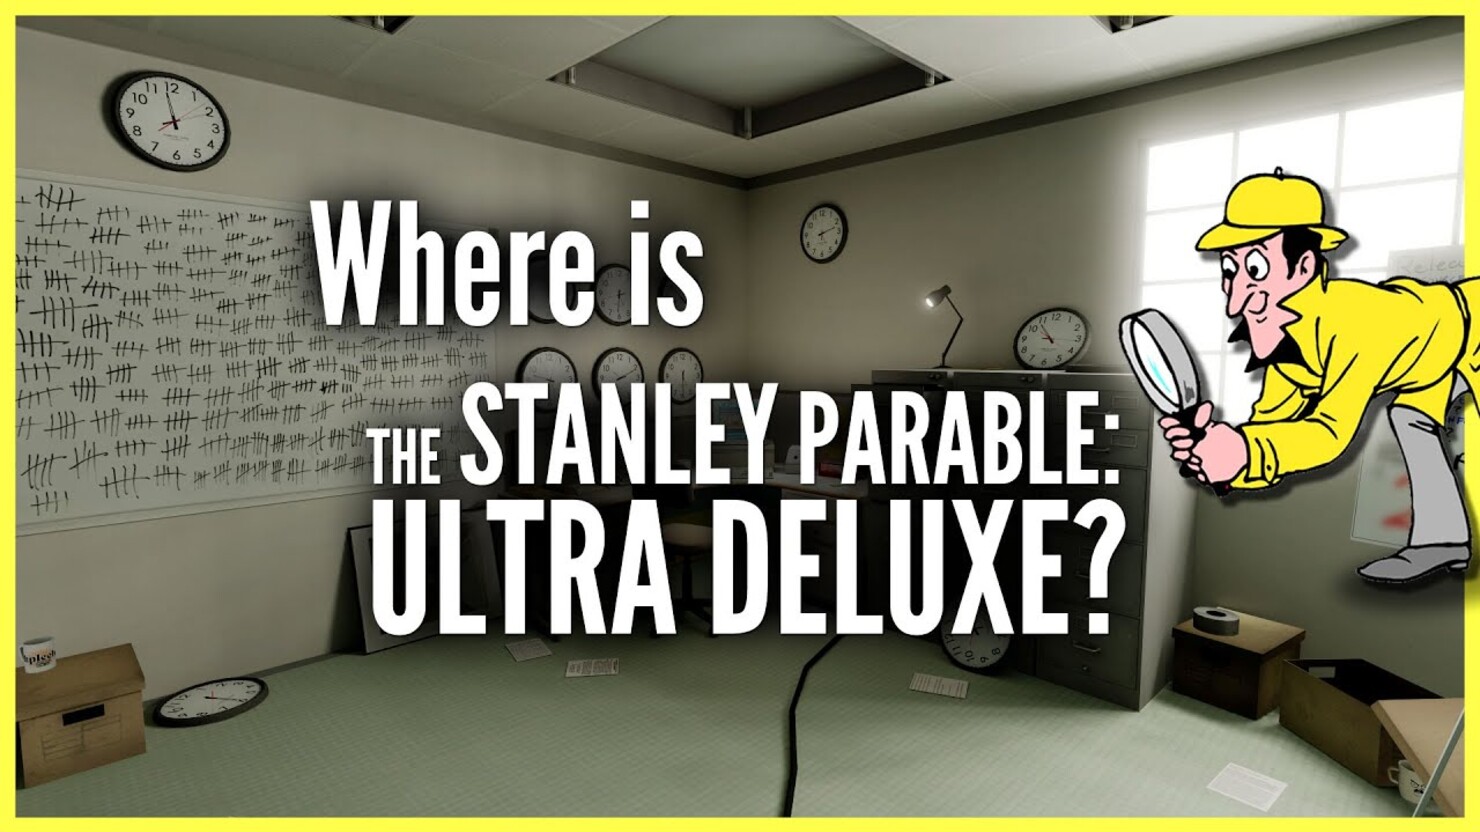 Ultra deluxe. Stanley Parable Ultra Deluxe Стэнли. The Stanley Parable: Ultra Deluxe. The Stanley Parable на андроид. The Stanley Parable Ultra Deluxe v.1.05 (2022).